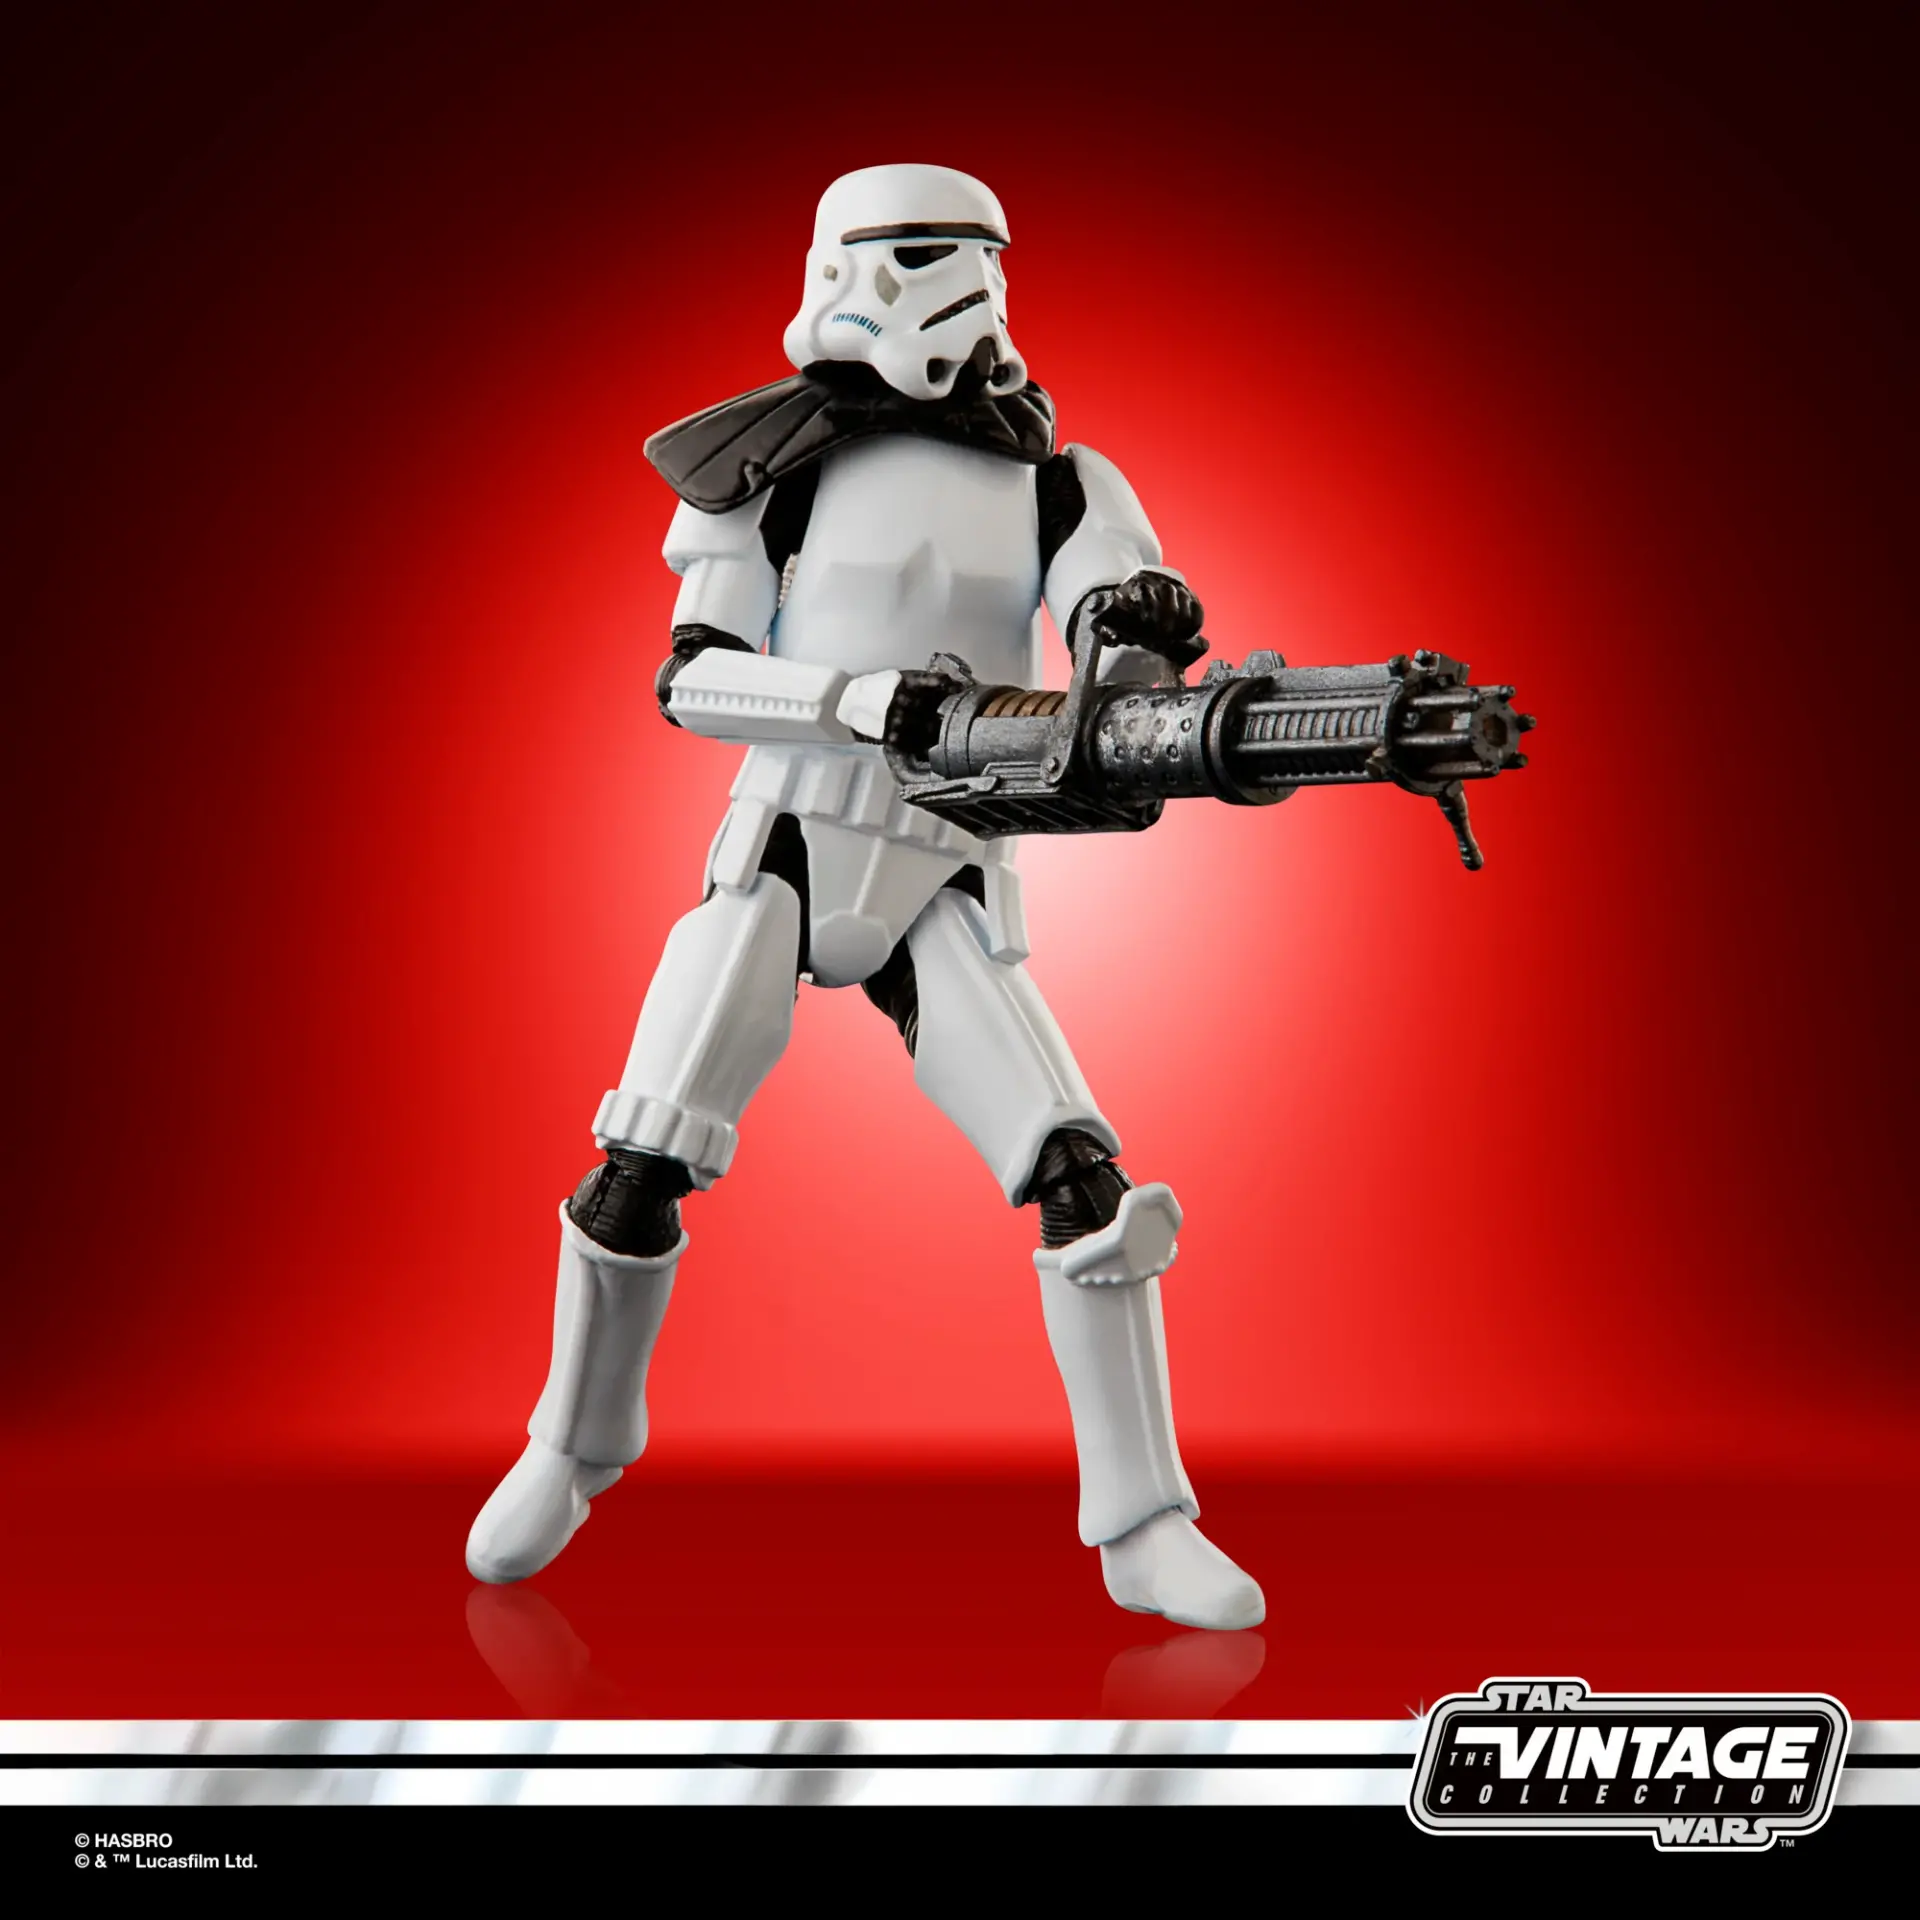 Star wars the vintage collection gaming greats heavy assault stormtrooper jawascave 3